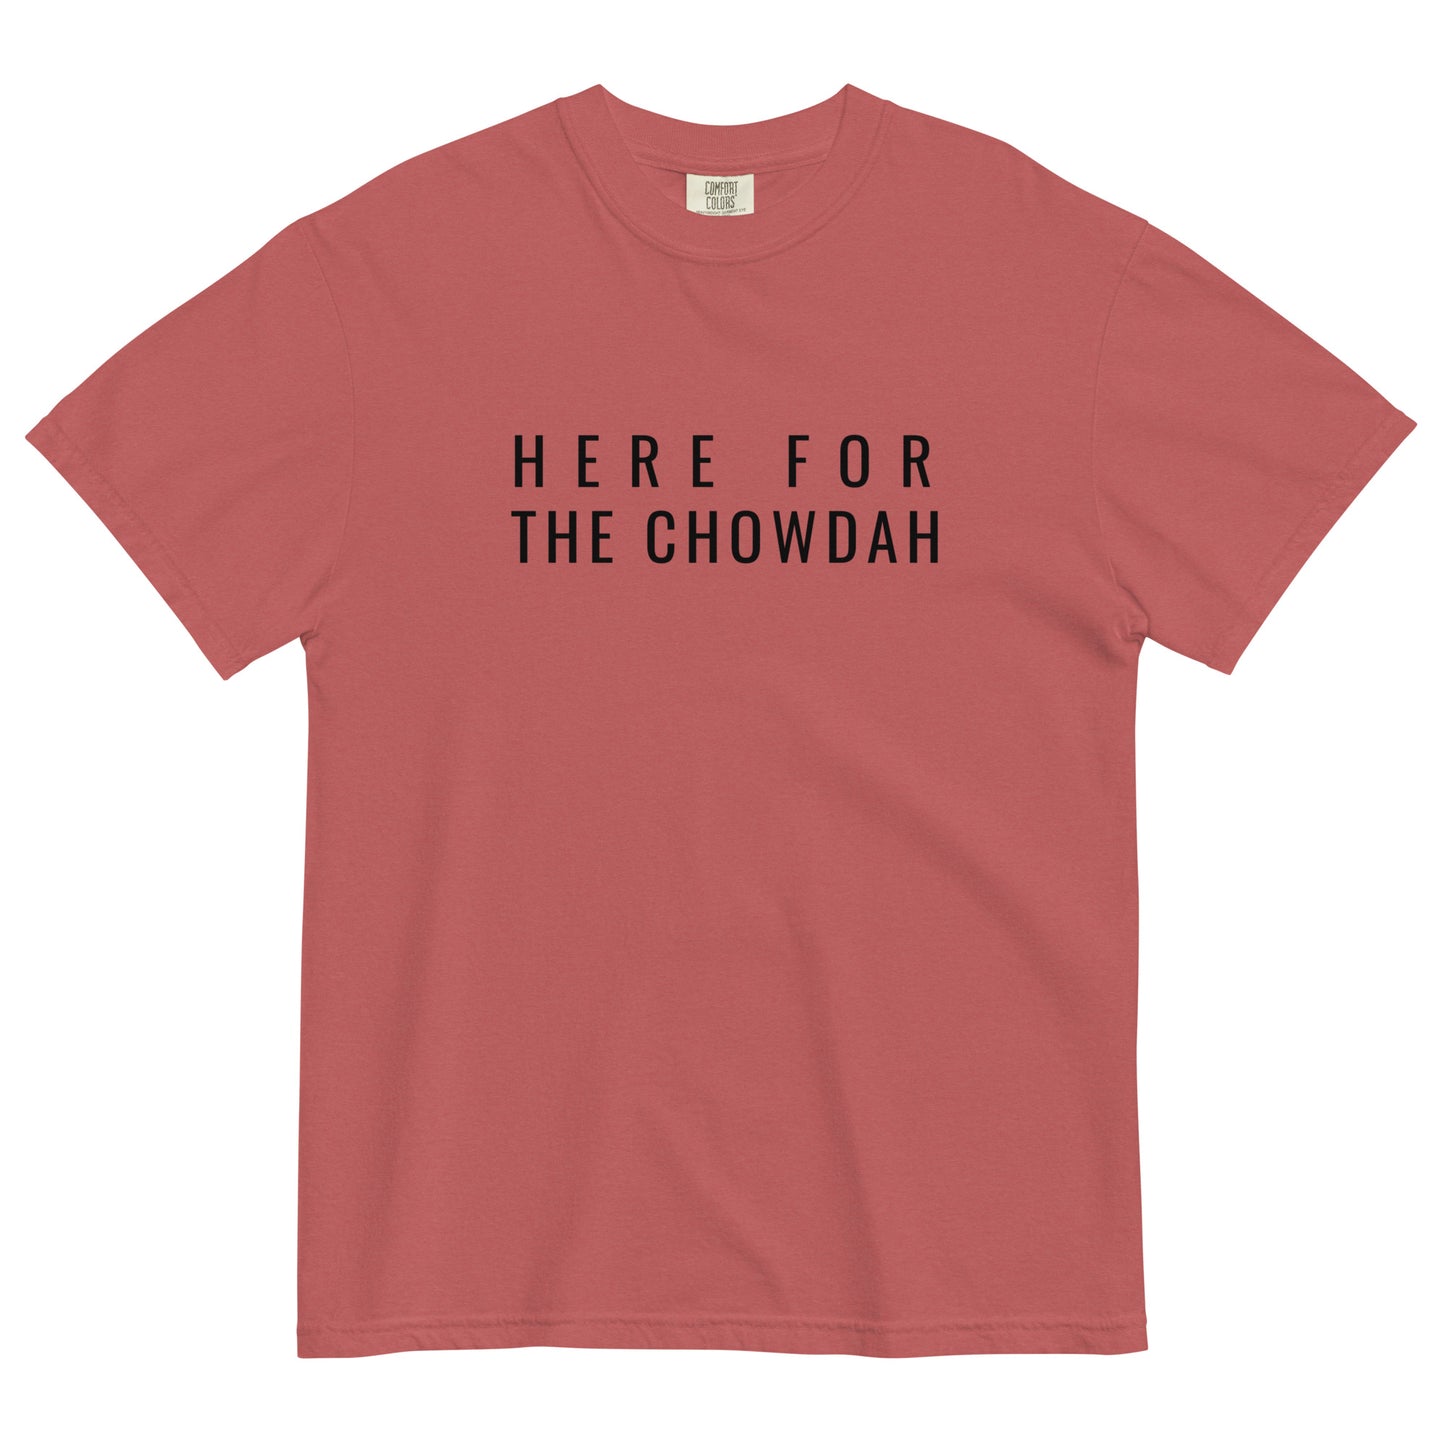 Here for the Chowdah T-Shirt